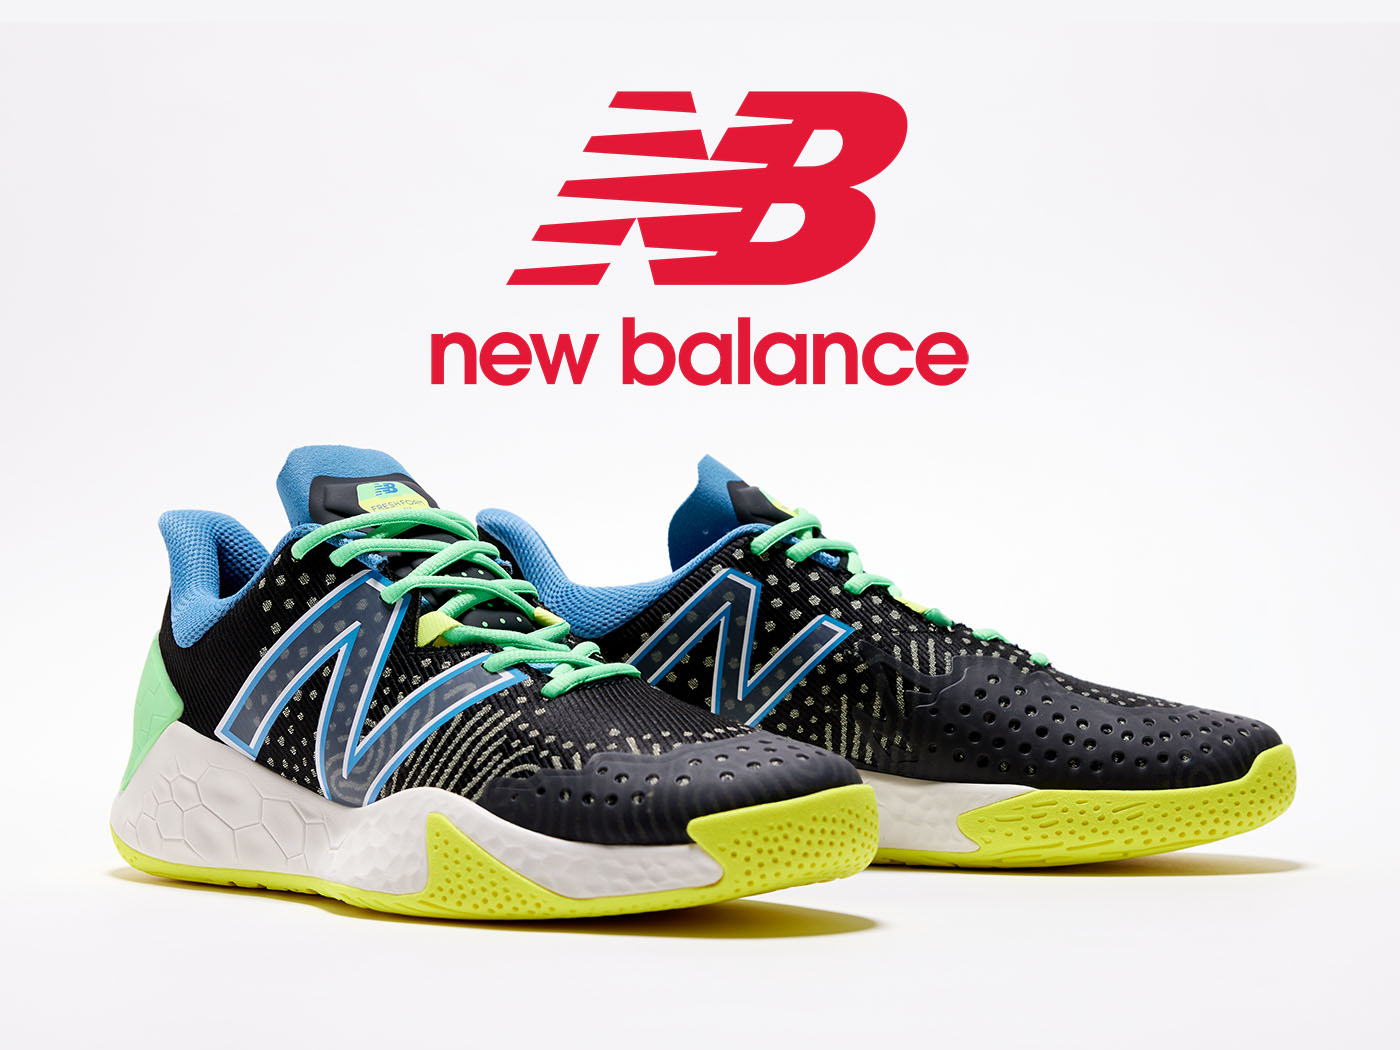 CHAUSSURES NEW BALANCE COCO CG1 TOUTES SURFACES - NEW BALANCE